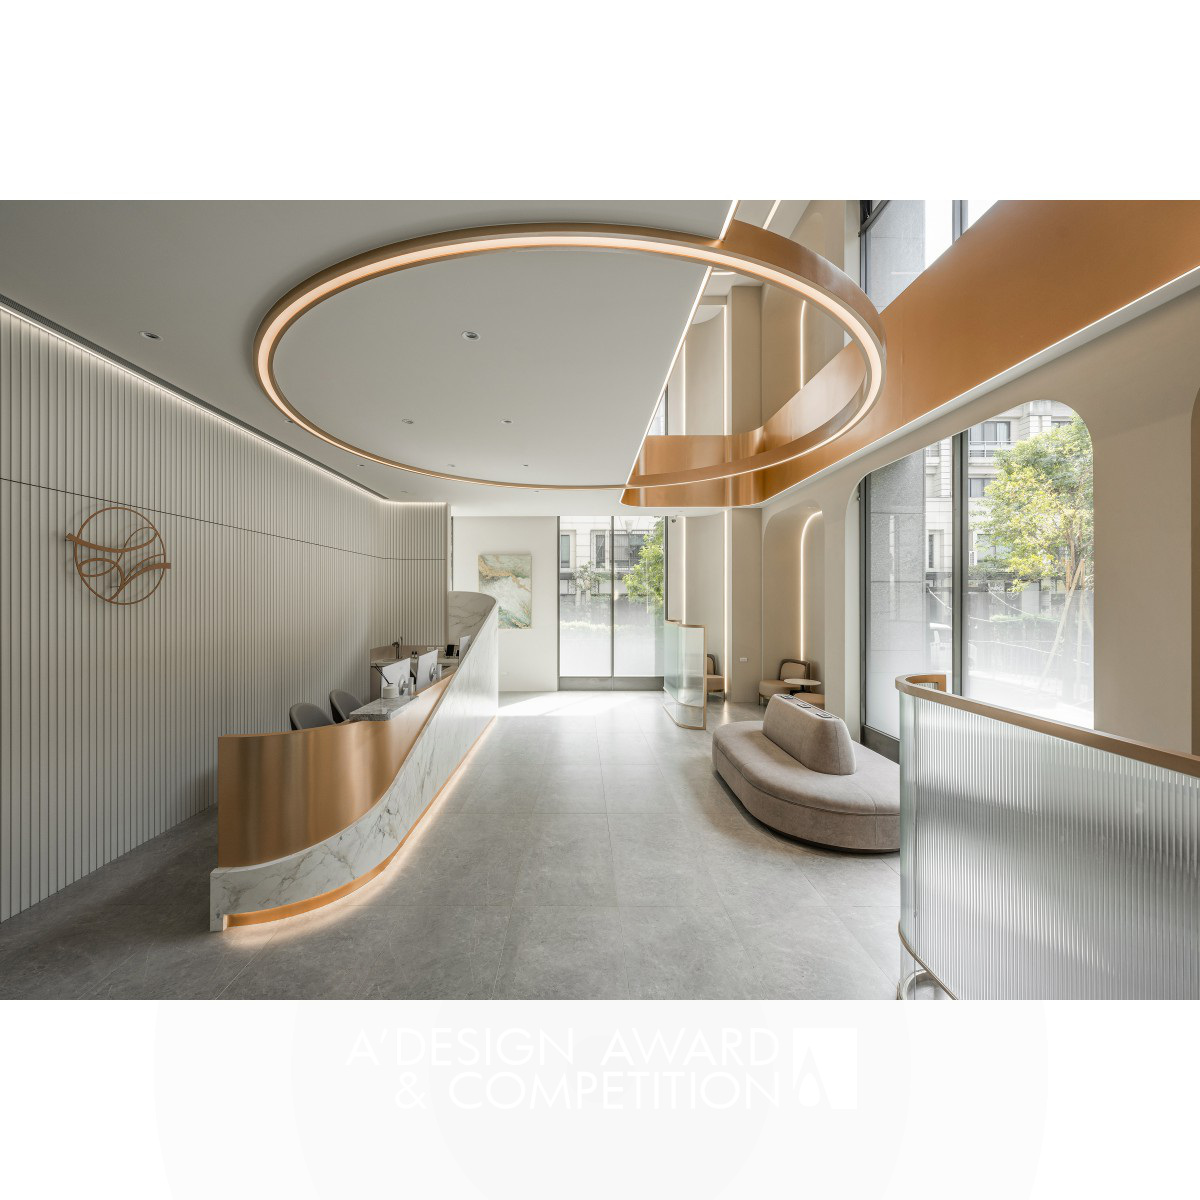 Chen.chiawen wins Silver at the prestigious A' Interior Space, Retail and Exhibition Design Award with Contour Of Circle Aesthetic Medical Clinic.